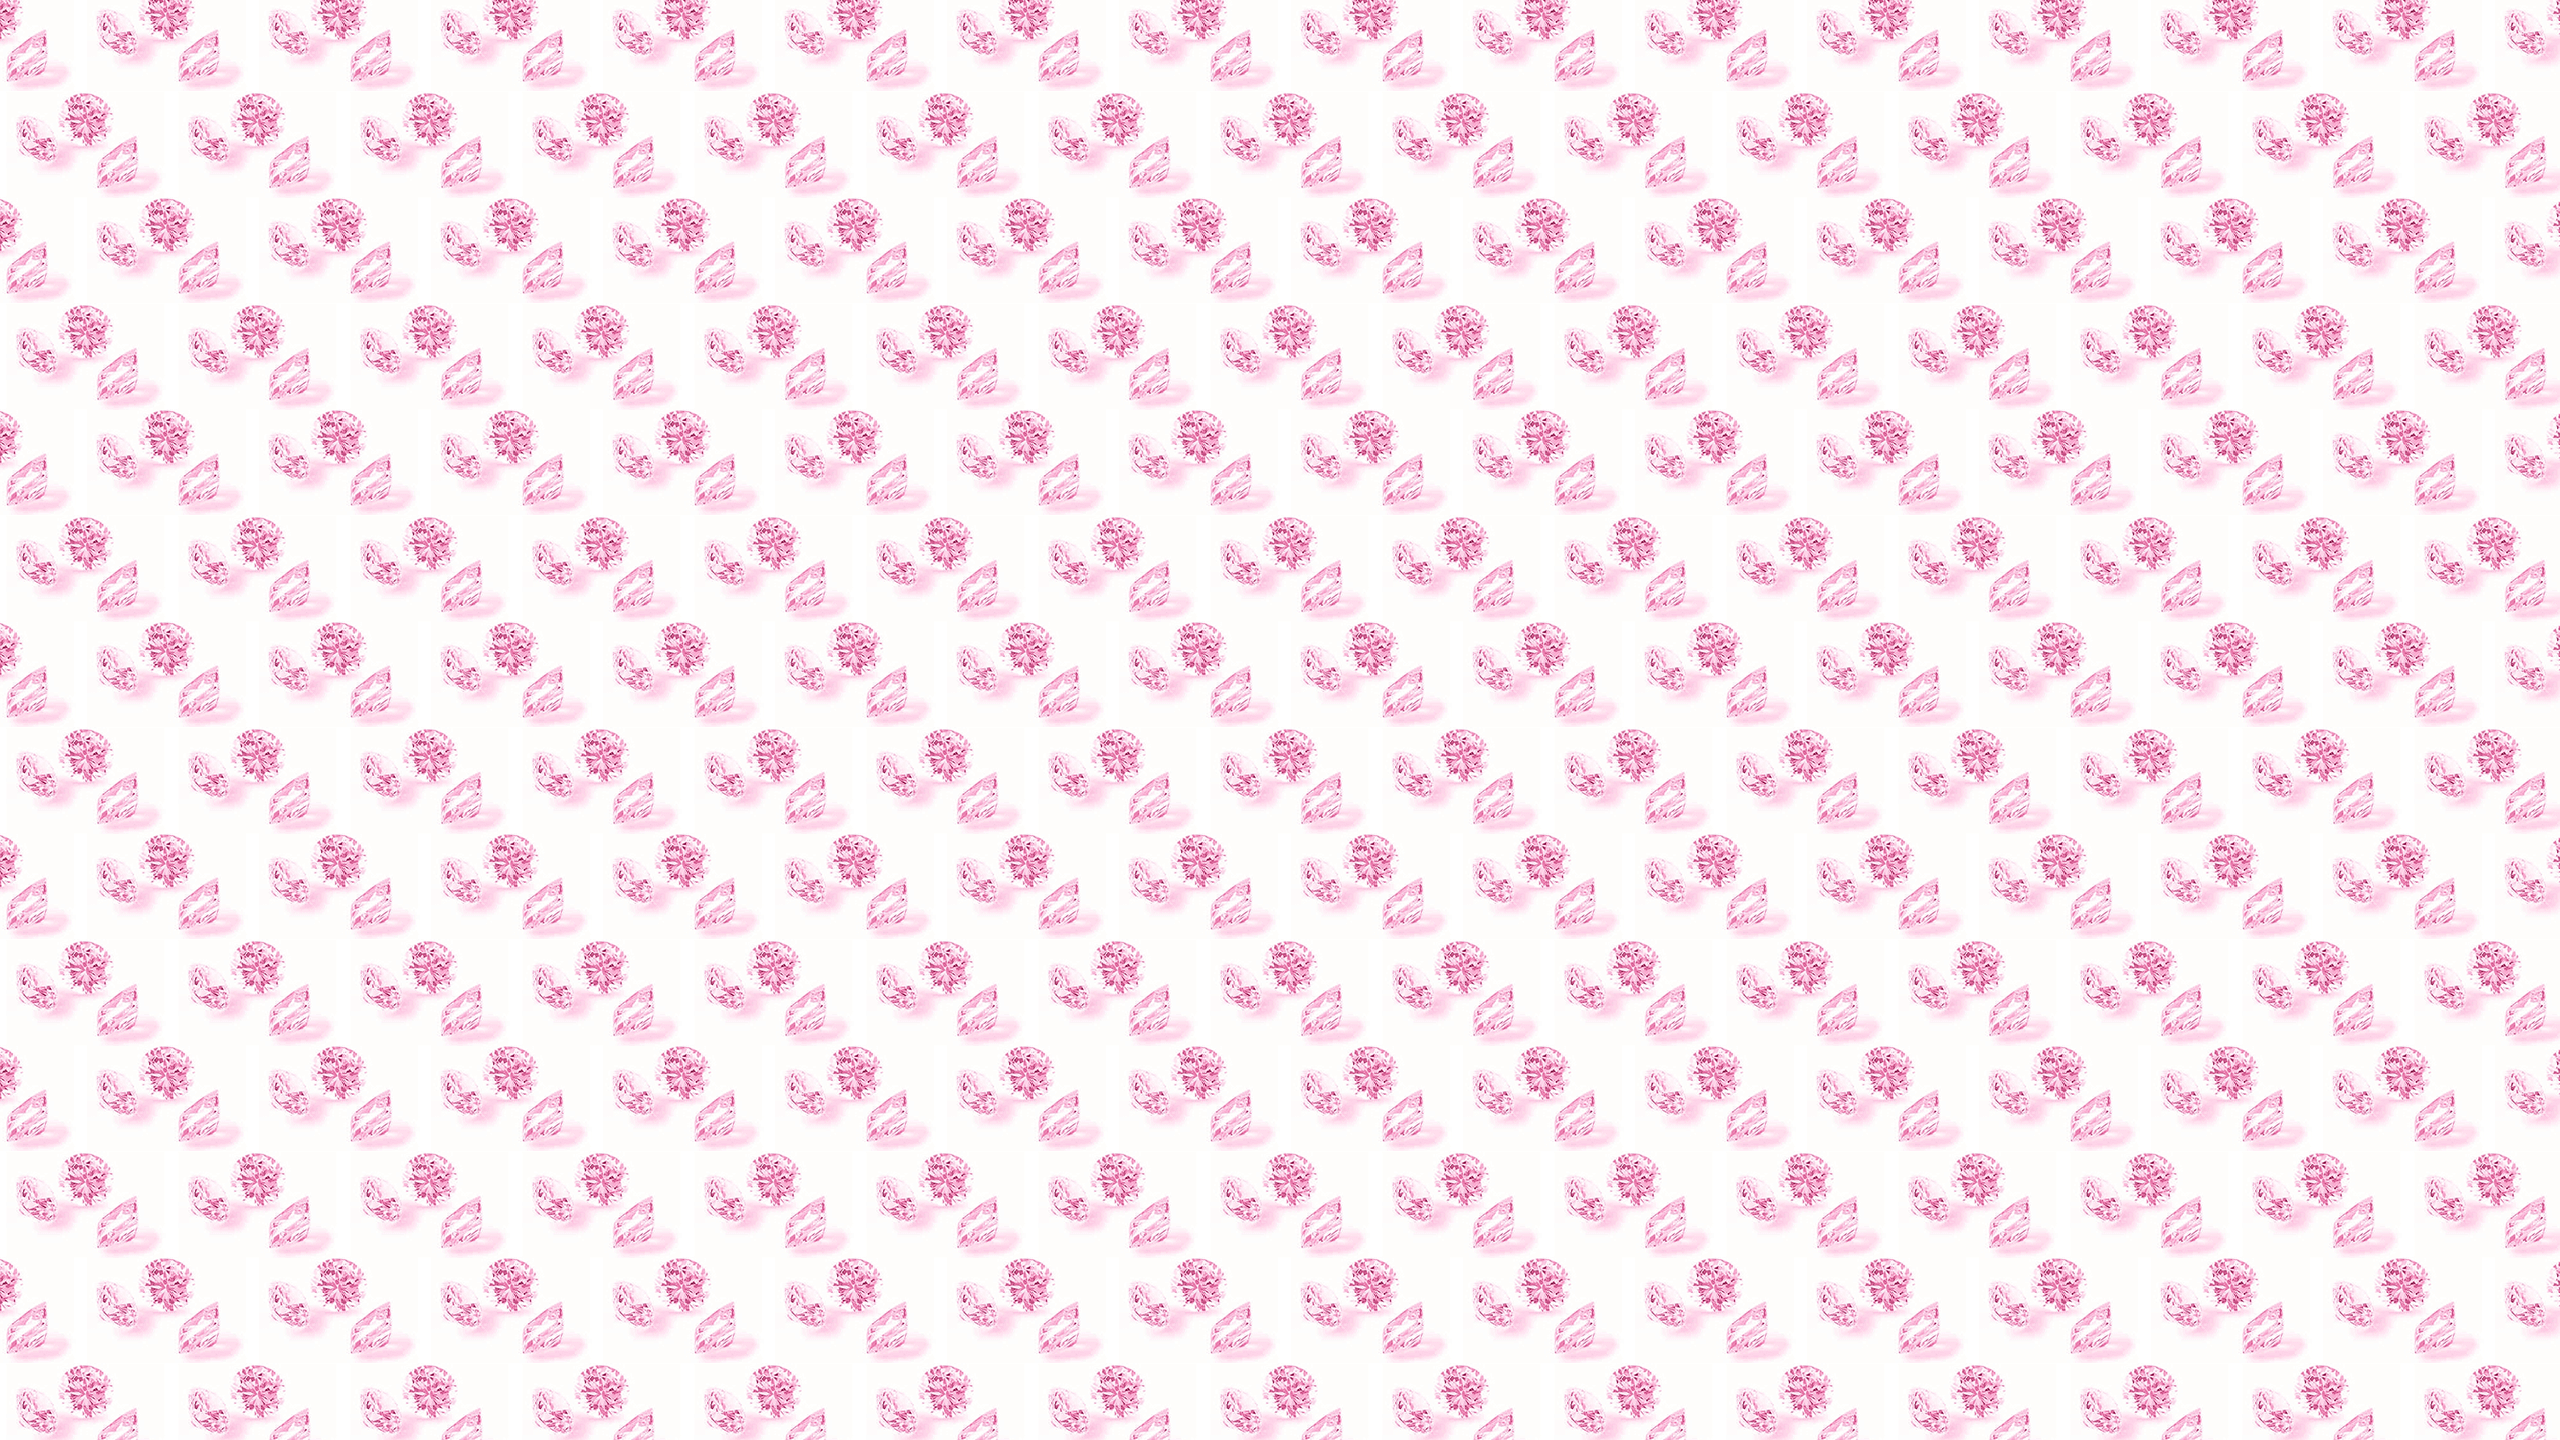 This Diamonds Pink Desktop Wallpaper Is Easy Just Save The